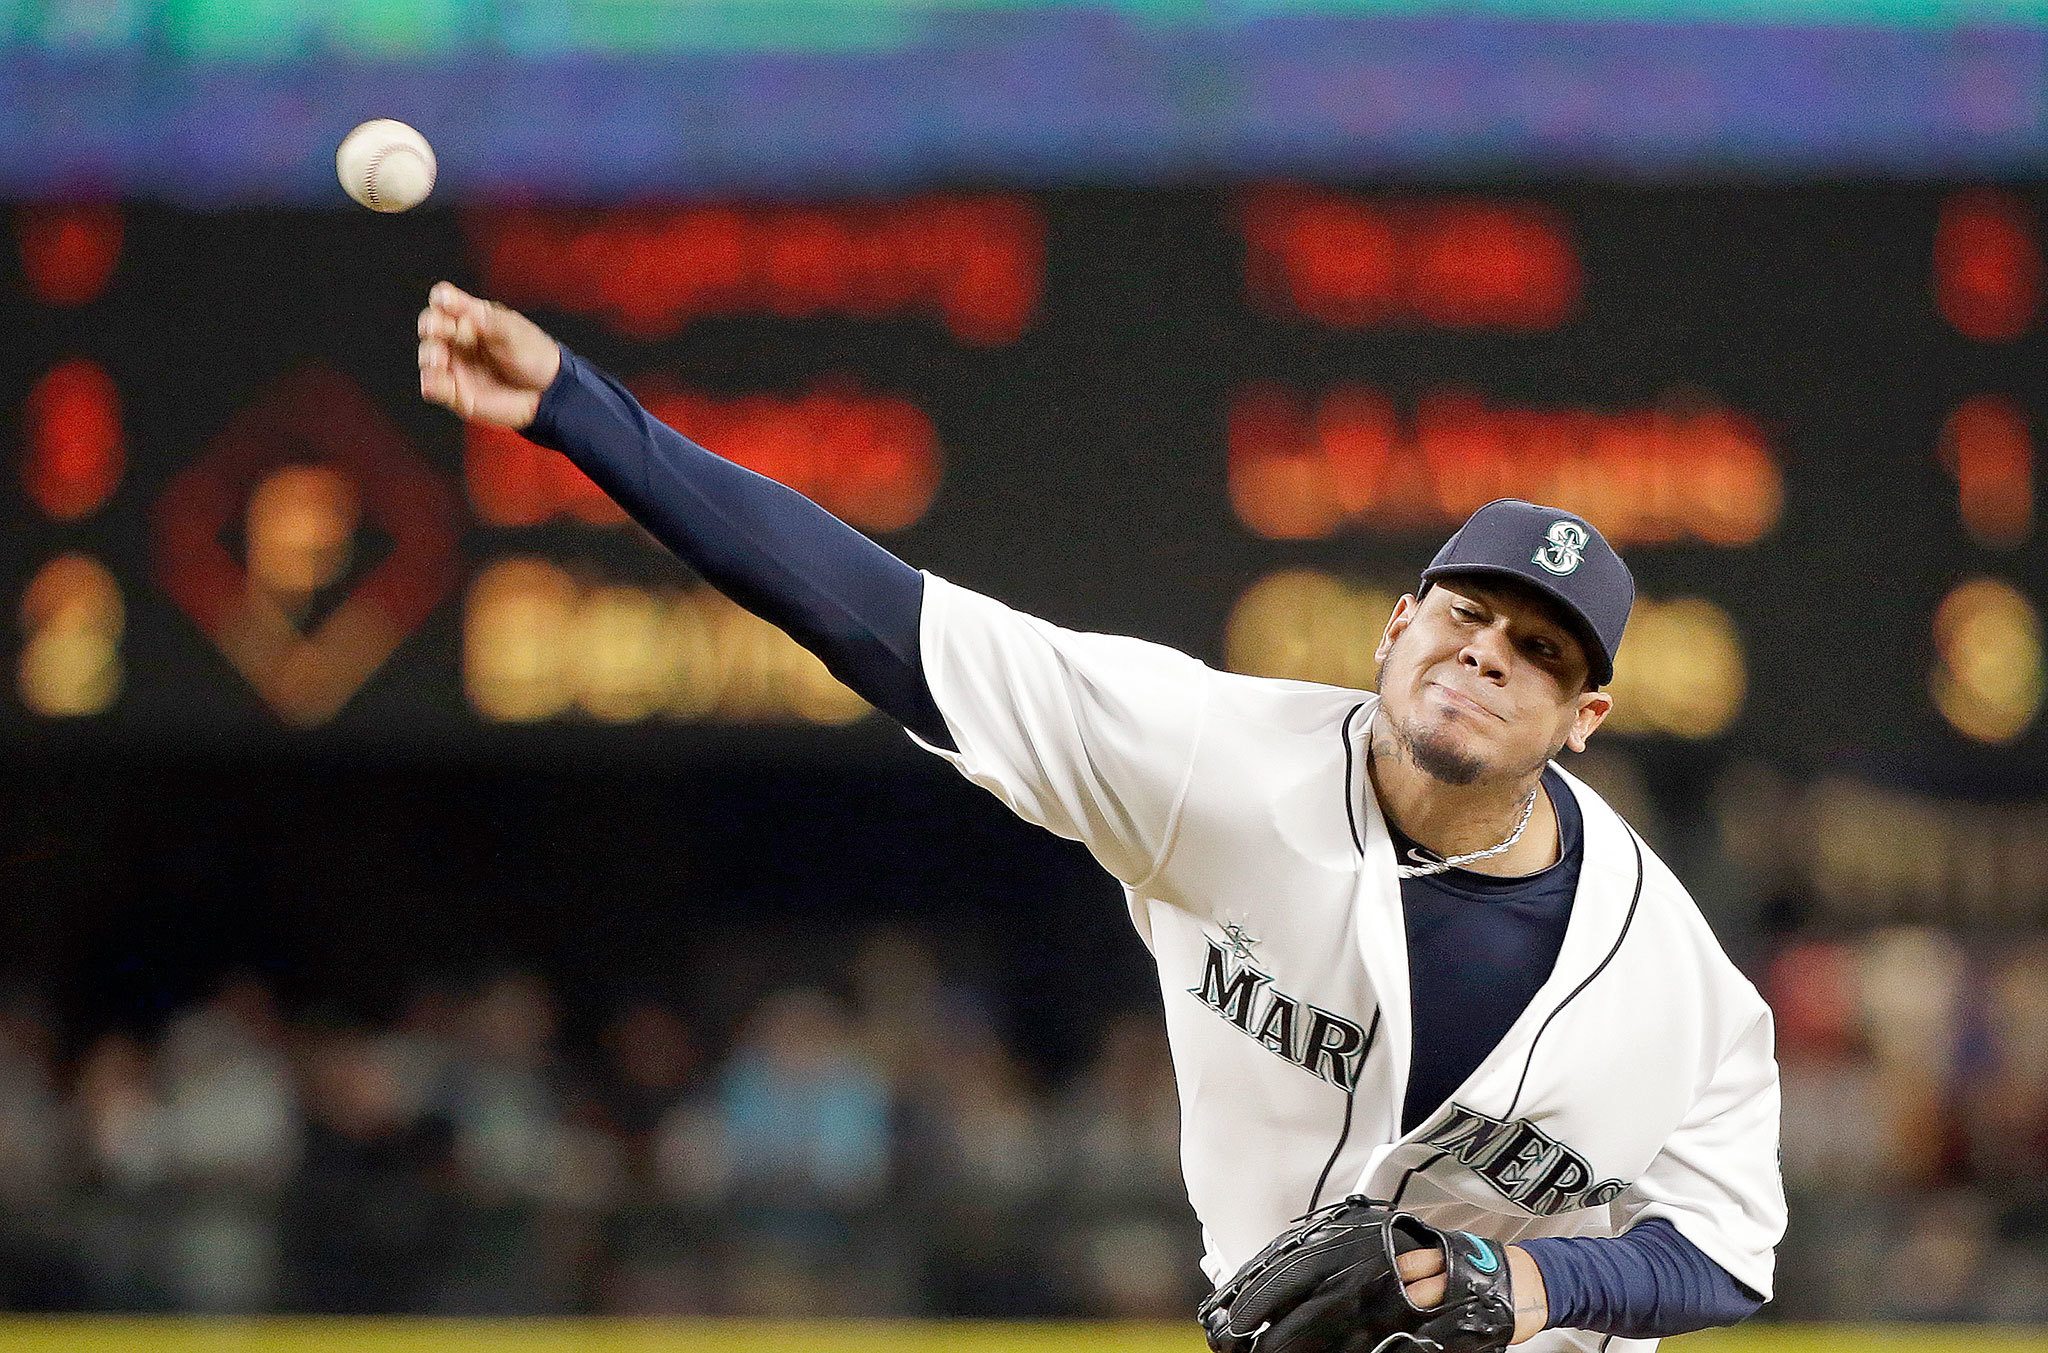 Mariners starting pitcher Felix Hernandez allowed one run and three hits in seventh innings. He struck out eight and walked four while throwing a season-high 117 pitches. (AP Photo/Elaine Thompson)